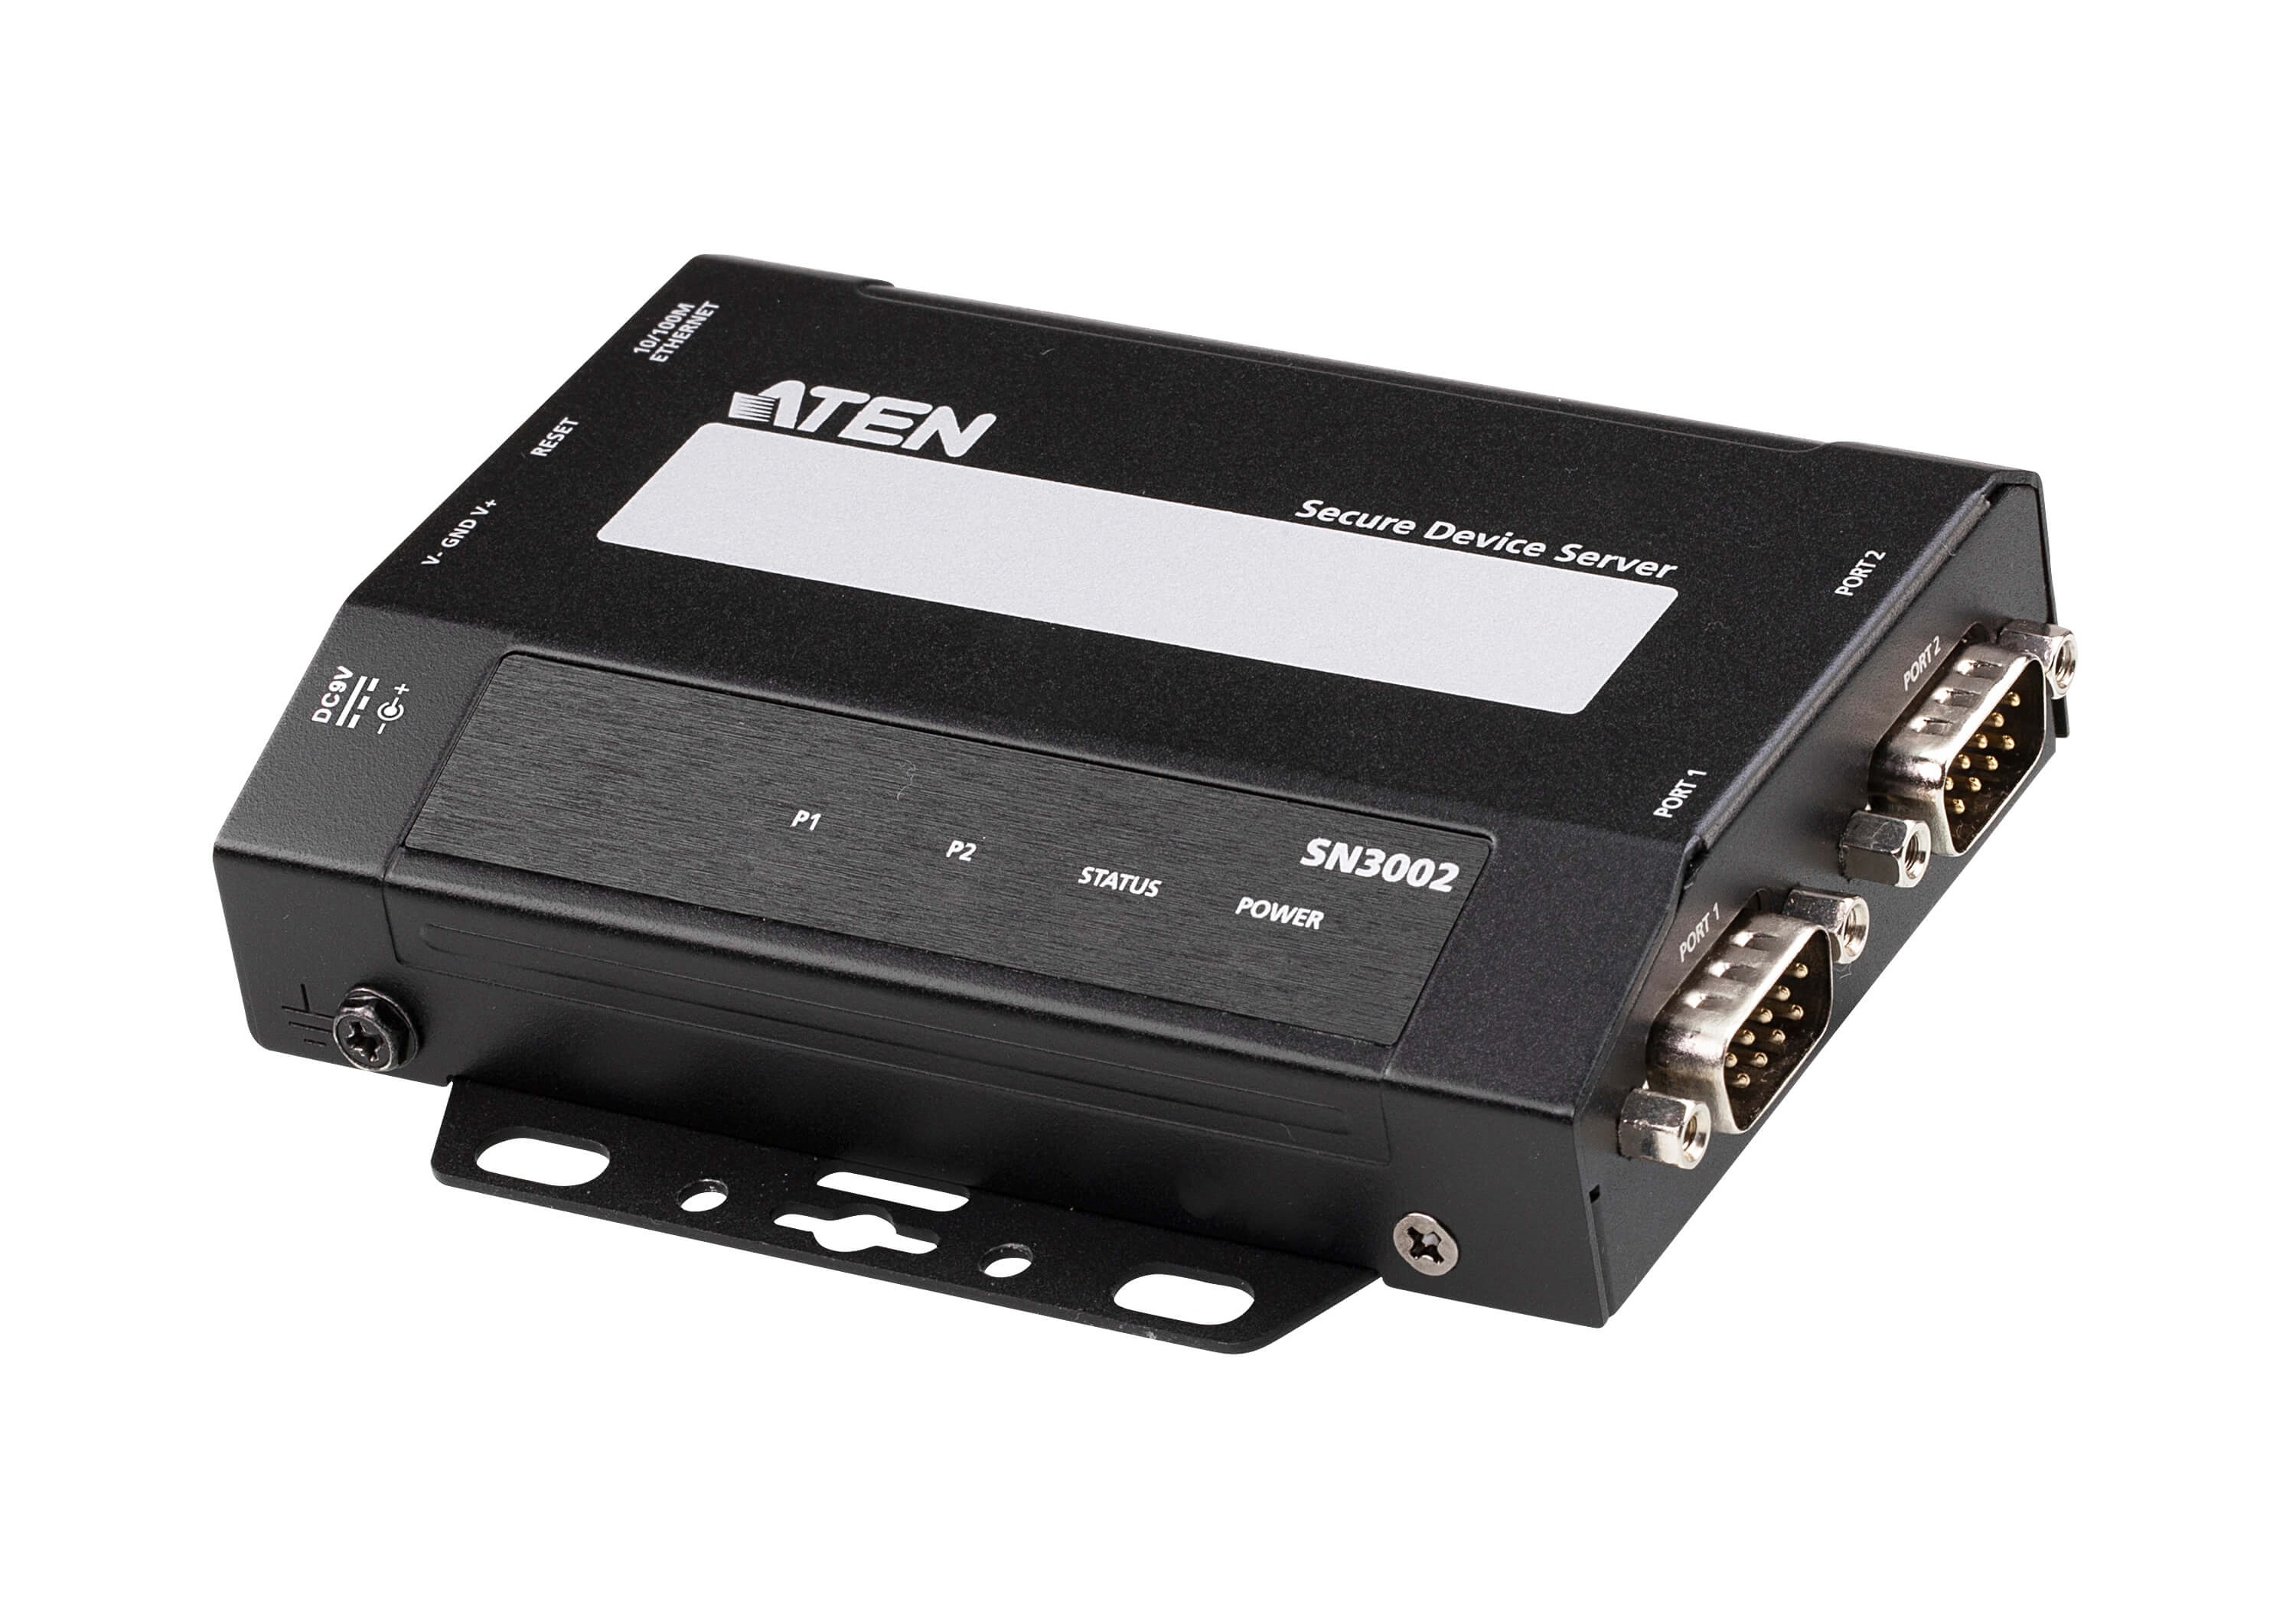 SN3002 2-Port RS-232 Secure Device Server by Aten